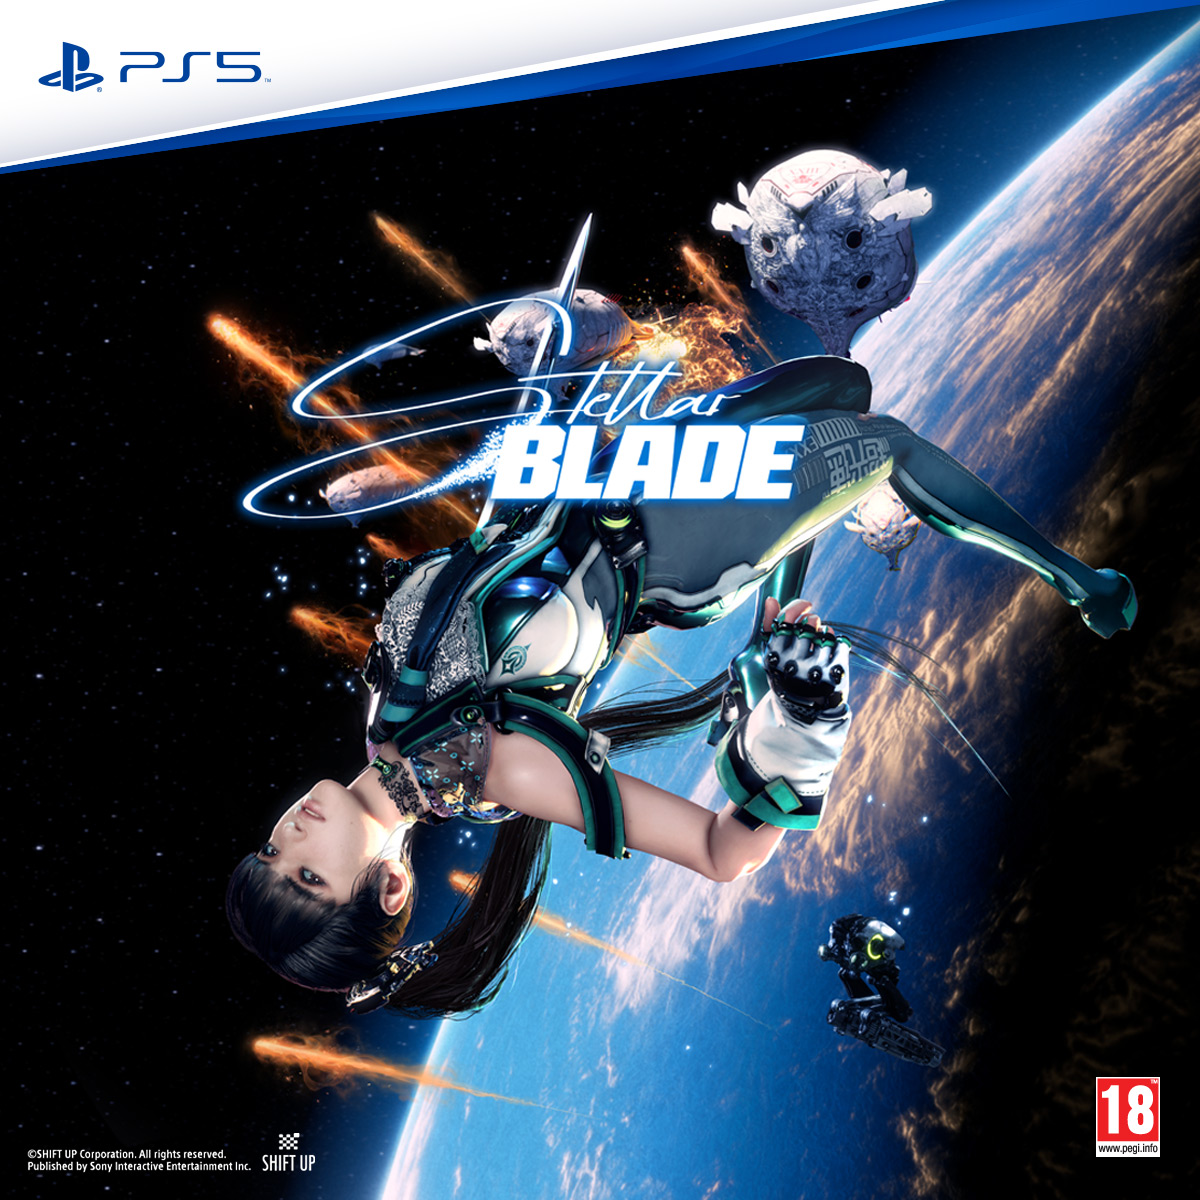 Reclaim Earth for humankind. 🌍 Stellar Blade is OUT NOW on PS5! 🎮 Shop now at Smyths Toys 👉 tinyurl.com/3nnhp3nn